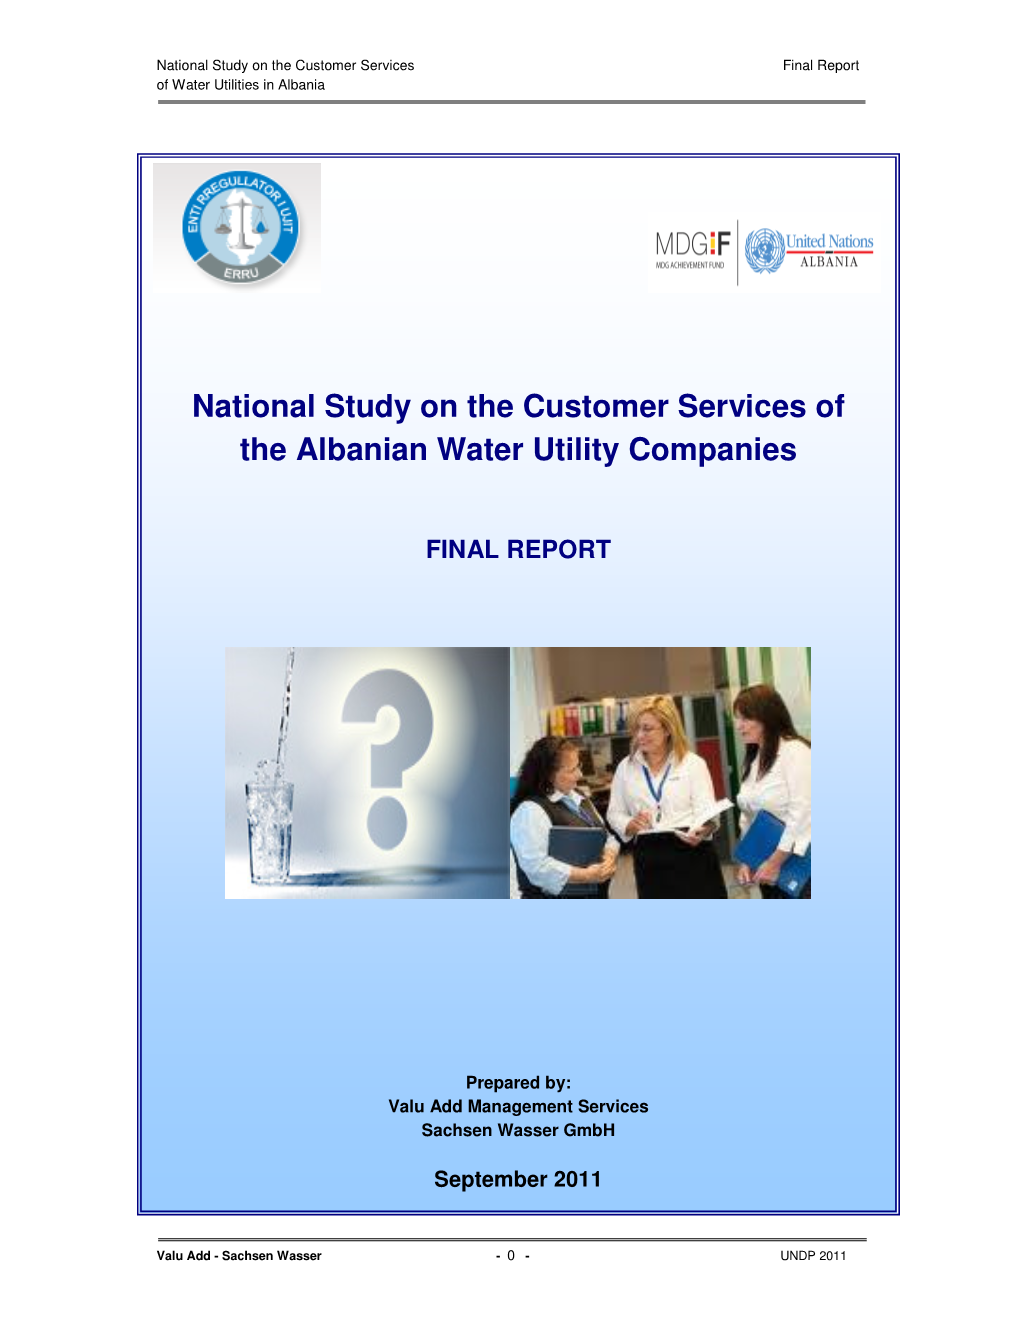 National Study on the Customer Services of the Albanian Water Utility Companies